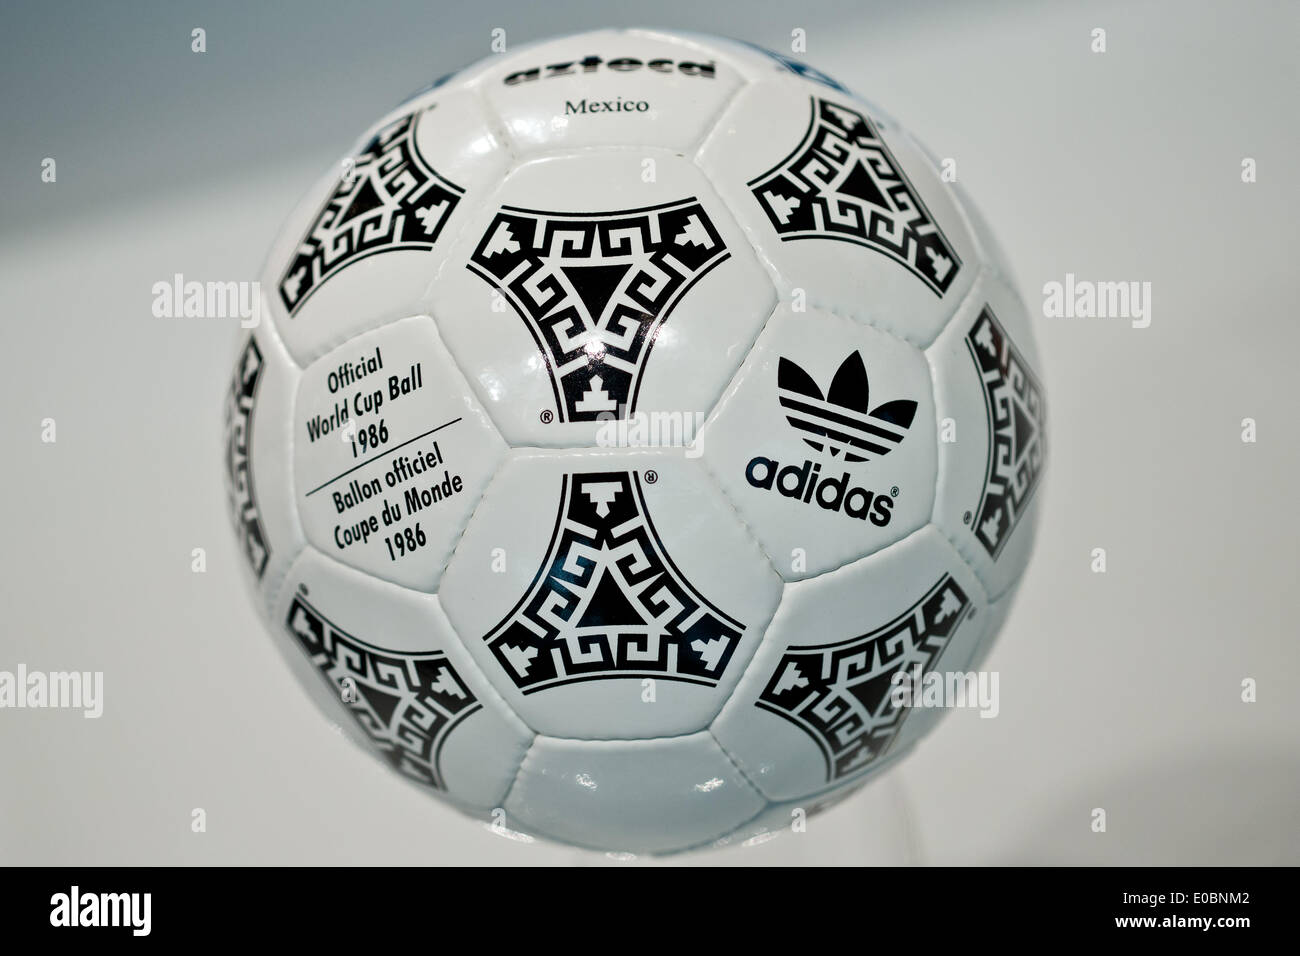 Fuerth, Germany. 08th May, 2014. The 'Azteca Mexico' soccer ball which was  the official ball of the 1986 soccer world cup in Mexico is pictured during  the general meeting of sporting goods